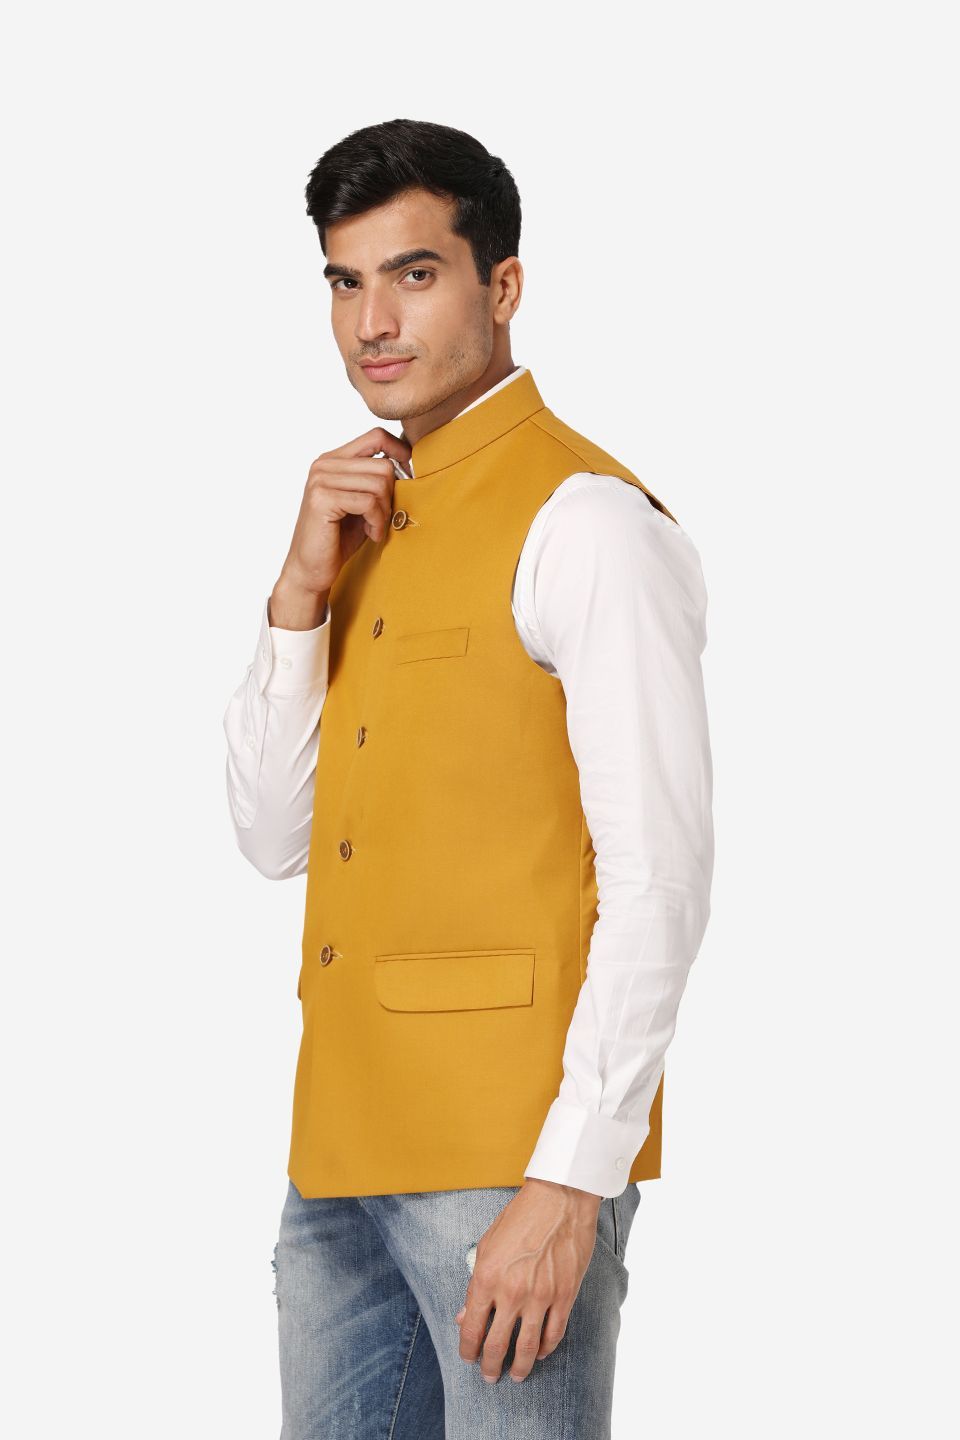 Wintage Men's Poly Cotton Festive and Casual Nehru Jacket Vest Waistcoat : Brown